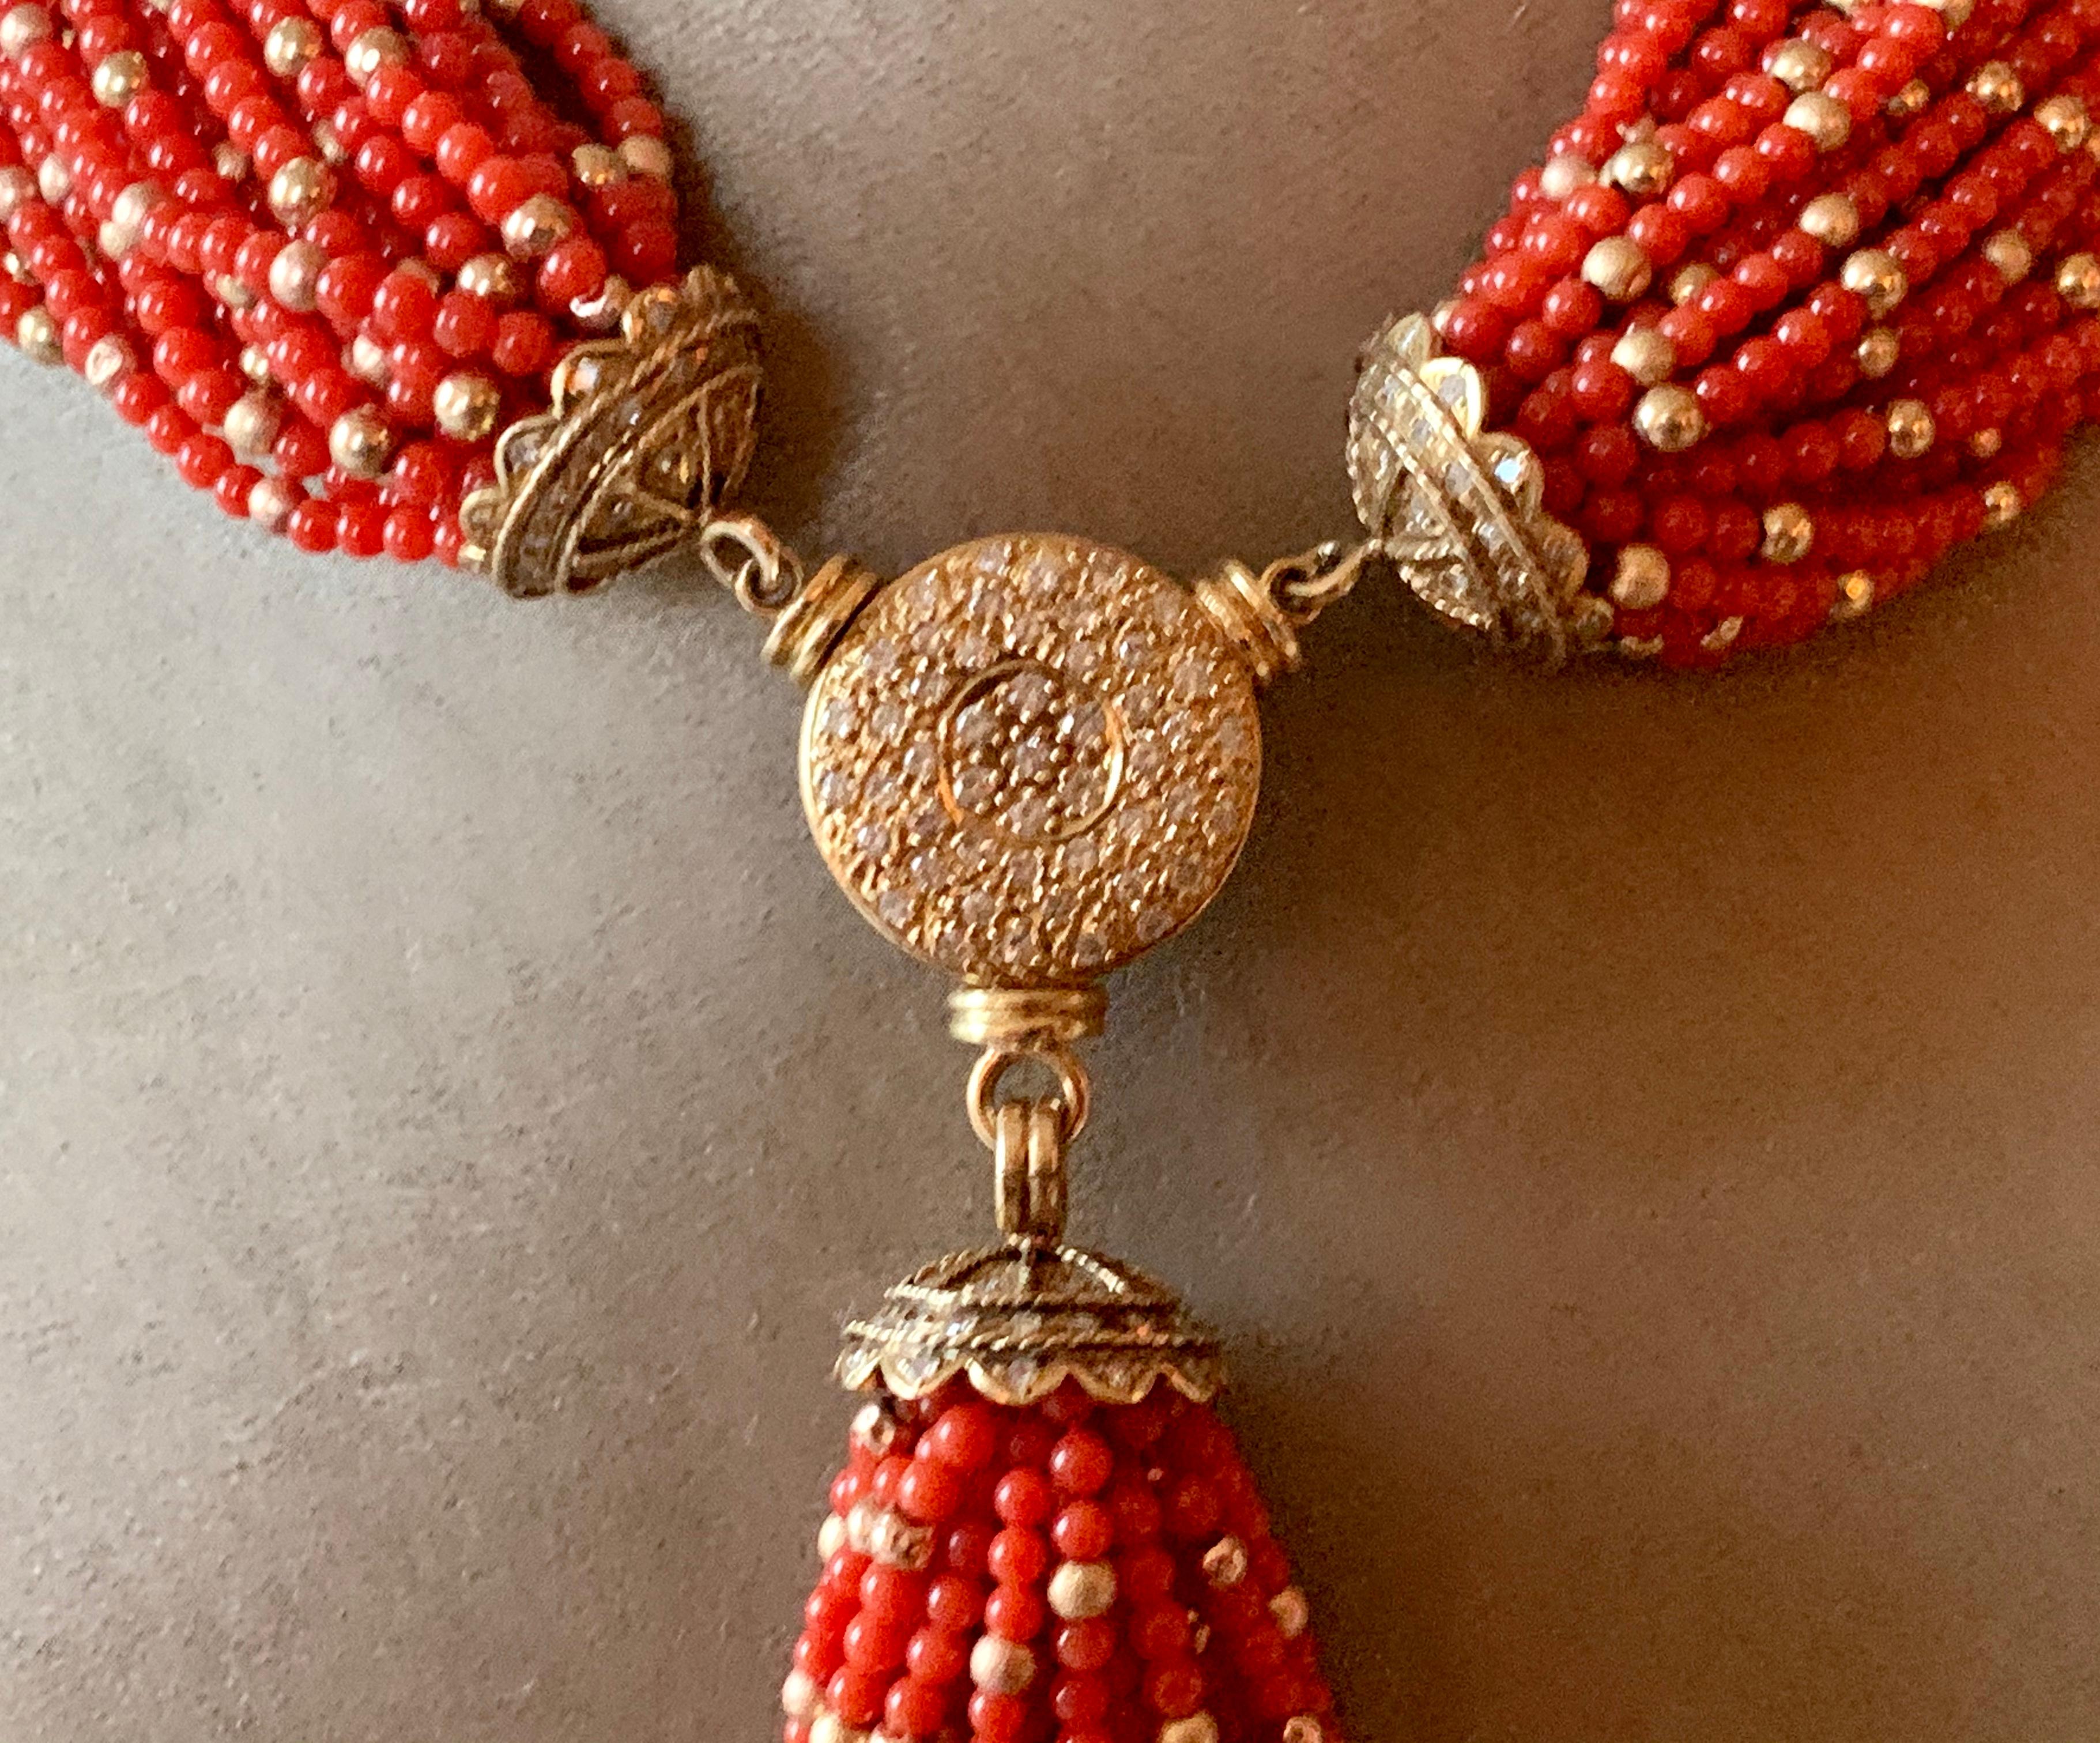 A rare torsade of 2.7 mm deep red coral and gold beads necklace witch a detachable tassel. 
This vibrant 31 strand natural coral torsade adds the perfect splash of color to any fashionable moment. Its versatile look trends from vintage-bohemian-chic